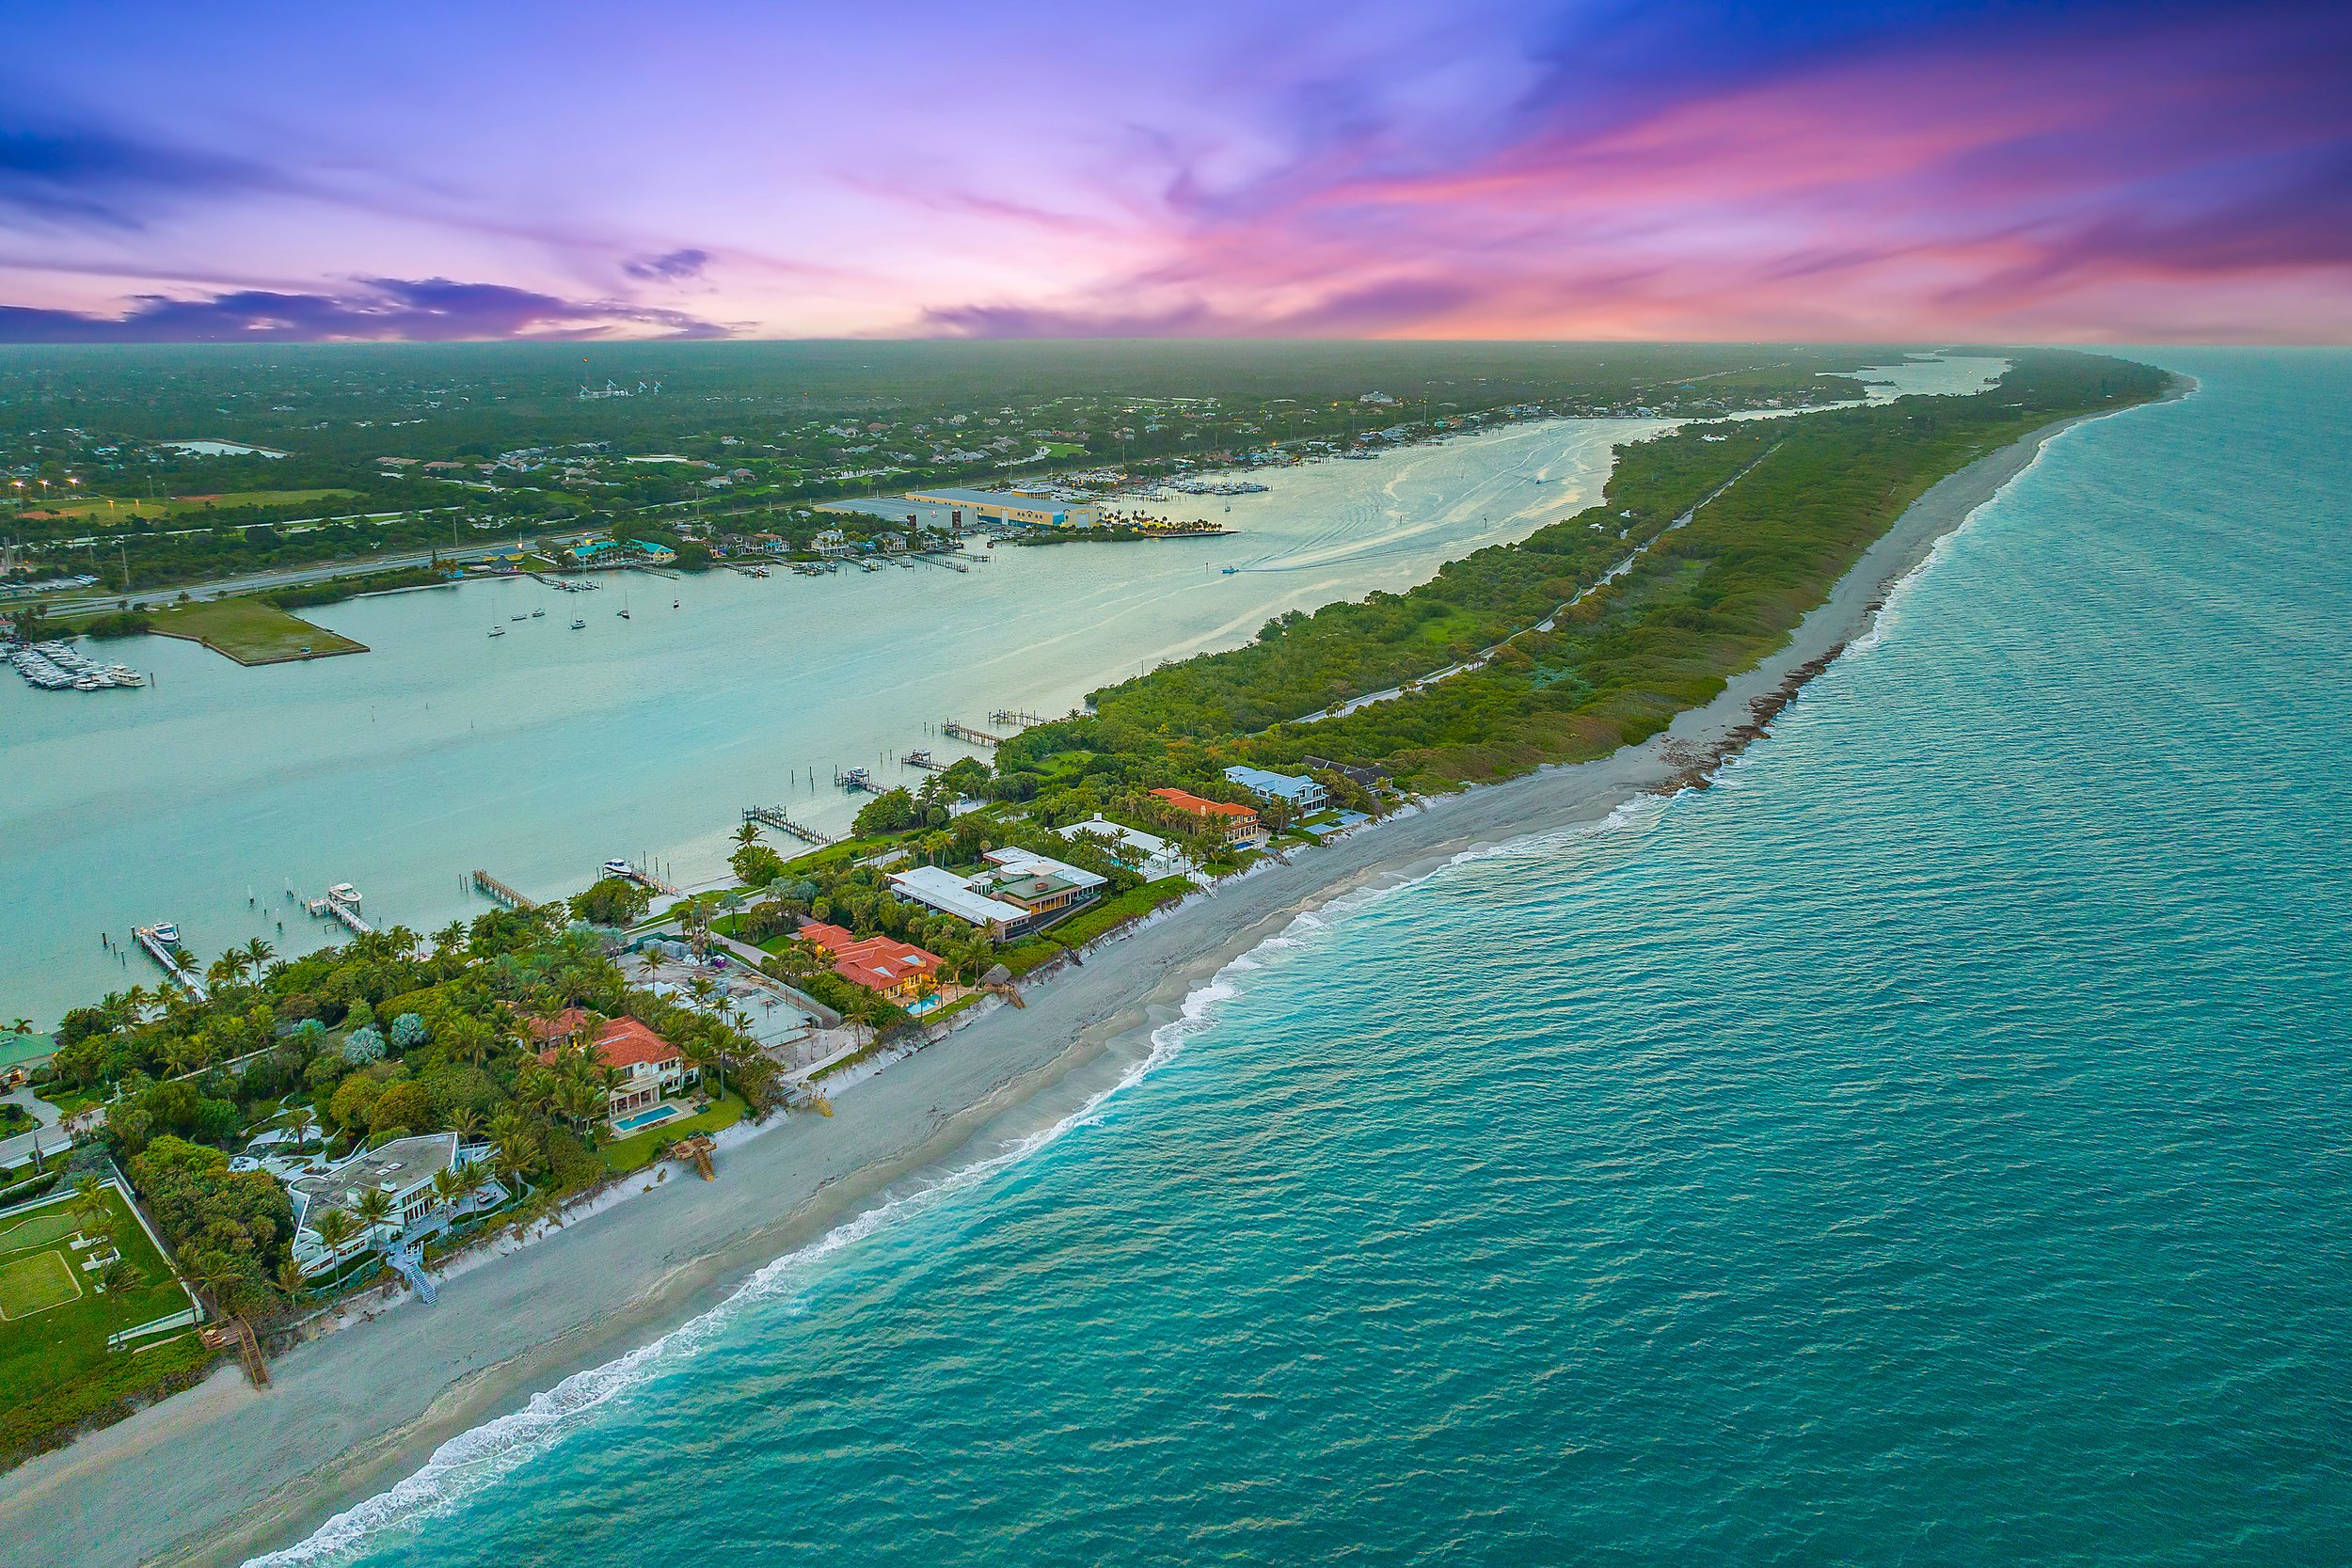 Tour A Jupiter Beachfront Mansion Owned By Clyde R. %22Buzz%22 Gibb Which Is Asking $24.9 Million 11.jpg